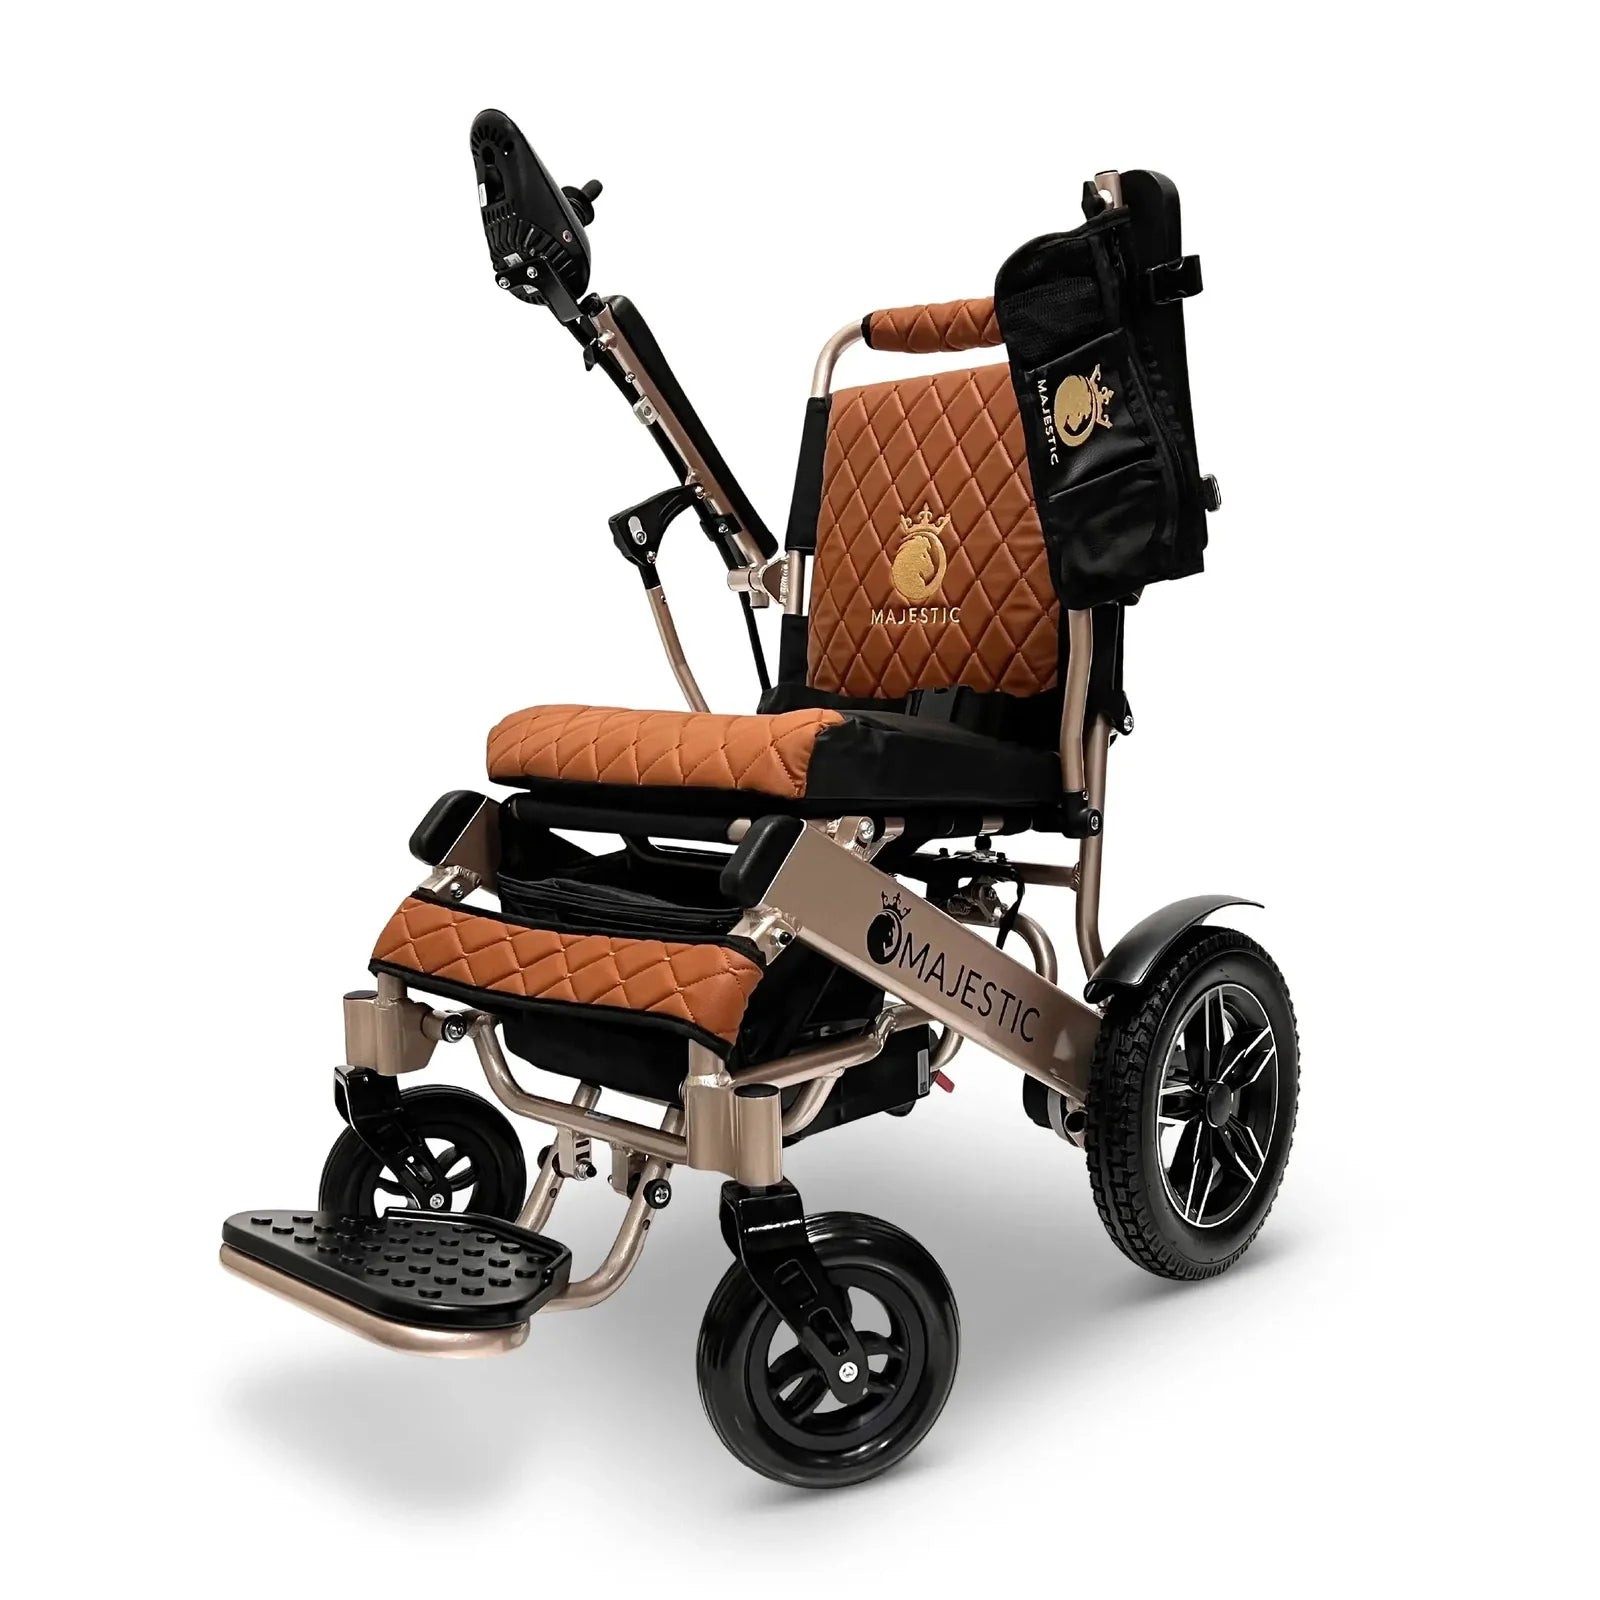 ComfyGO Majestic IQ-8000 Remote Controlled Lightweight Folding Electric Wheelchair Power Wheelchairs ComfyGO Bronze Taba 10 Miles & 17.5" Seat Width